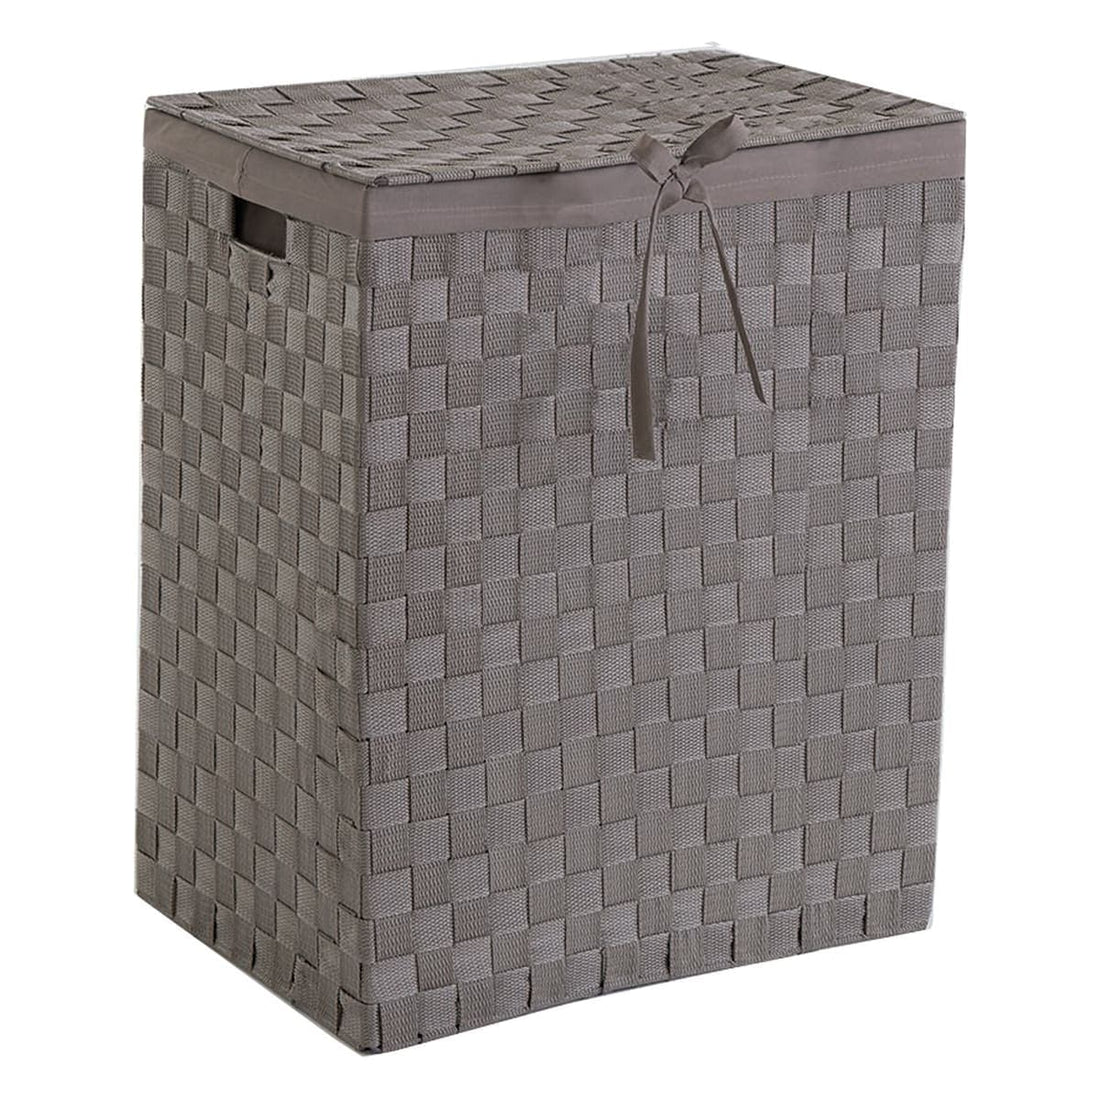 TEX FOLDING LAUNDRY BASKET IN WOVEN POLYESTER IN TAUPE COLOUR 30X30X50H CM WITH LINING